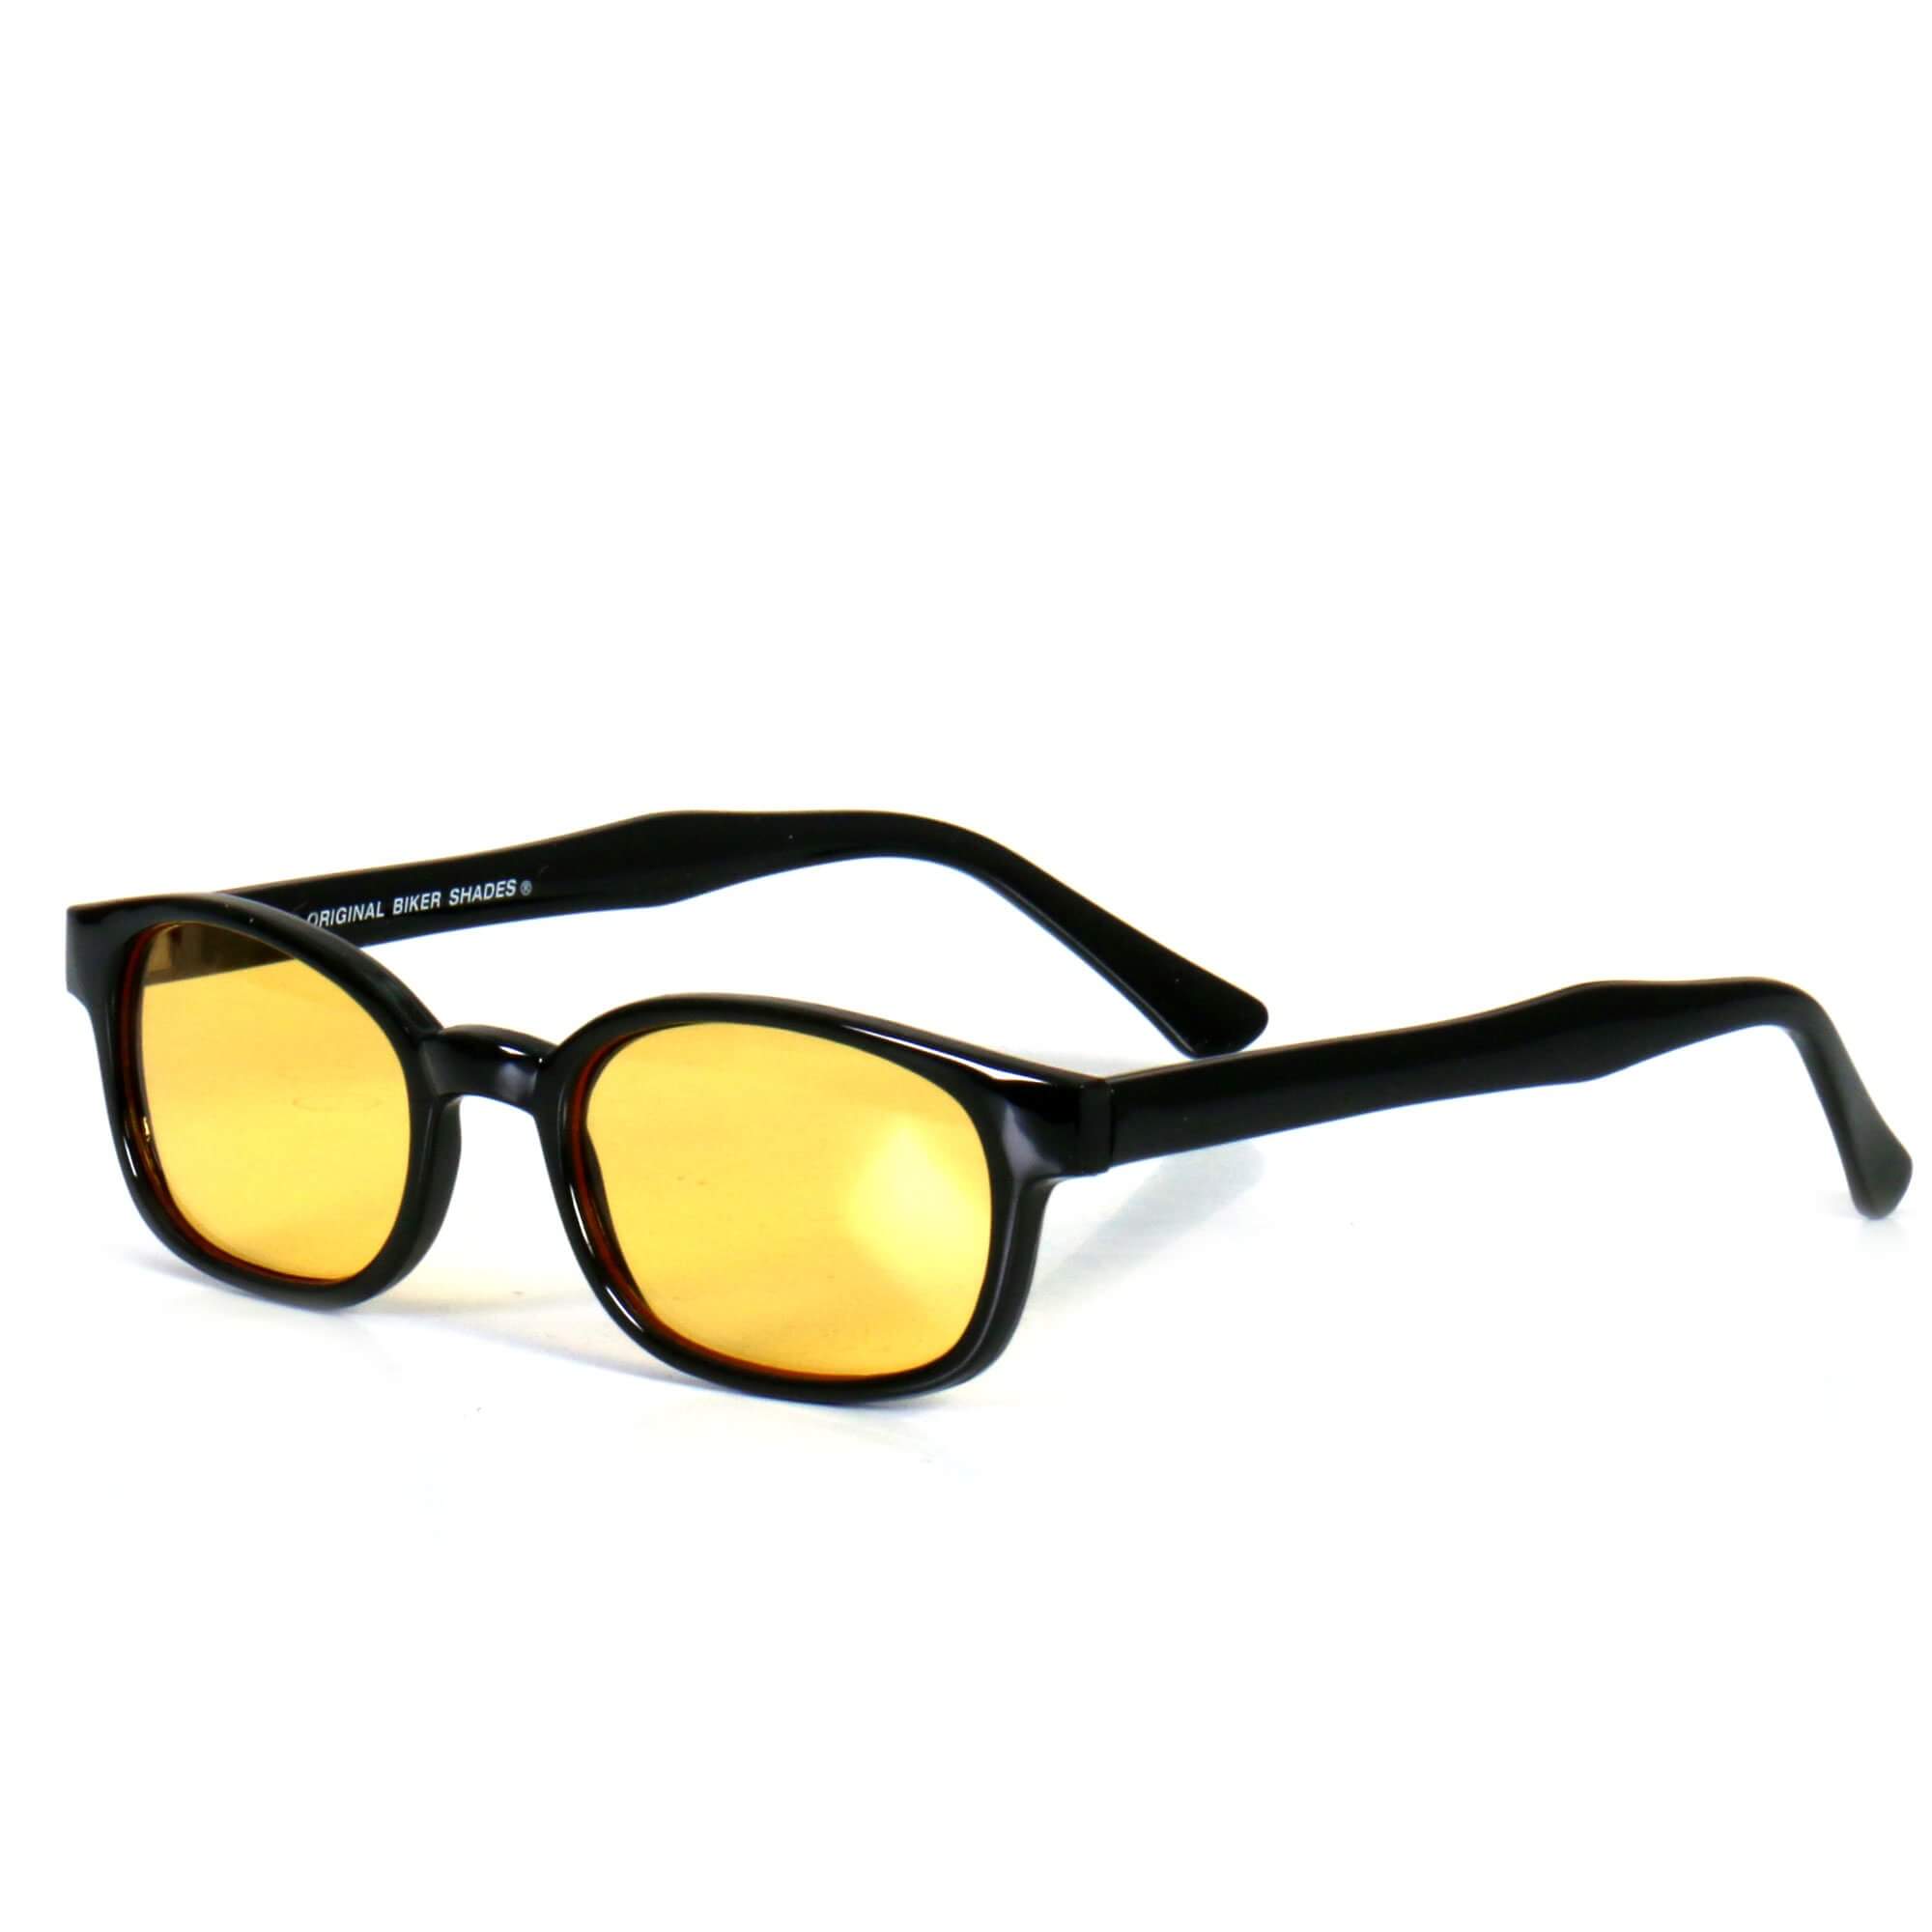 Hot Leathers KD's Sunglasses - Yellow Lenses